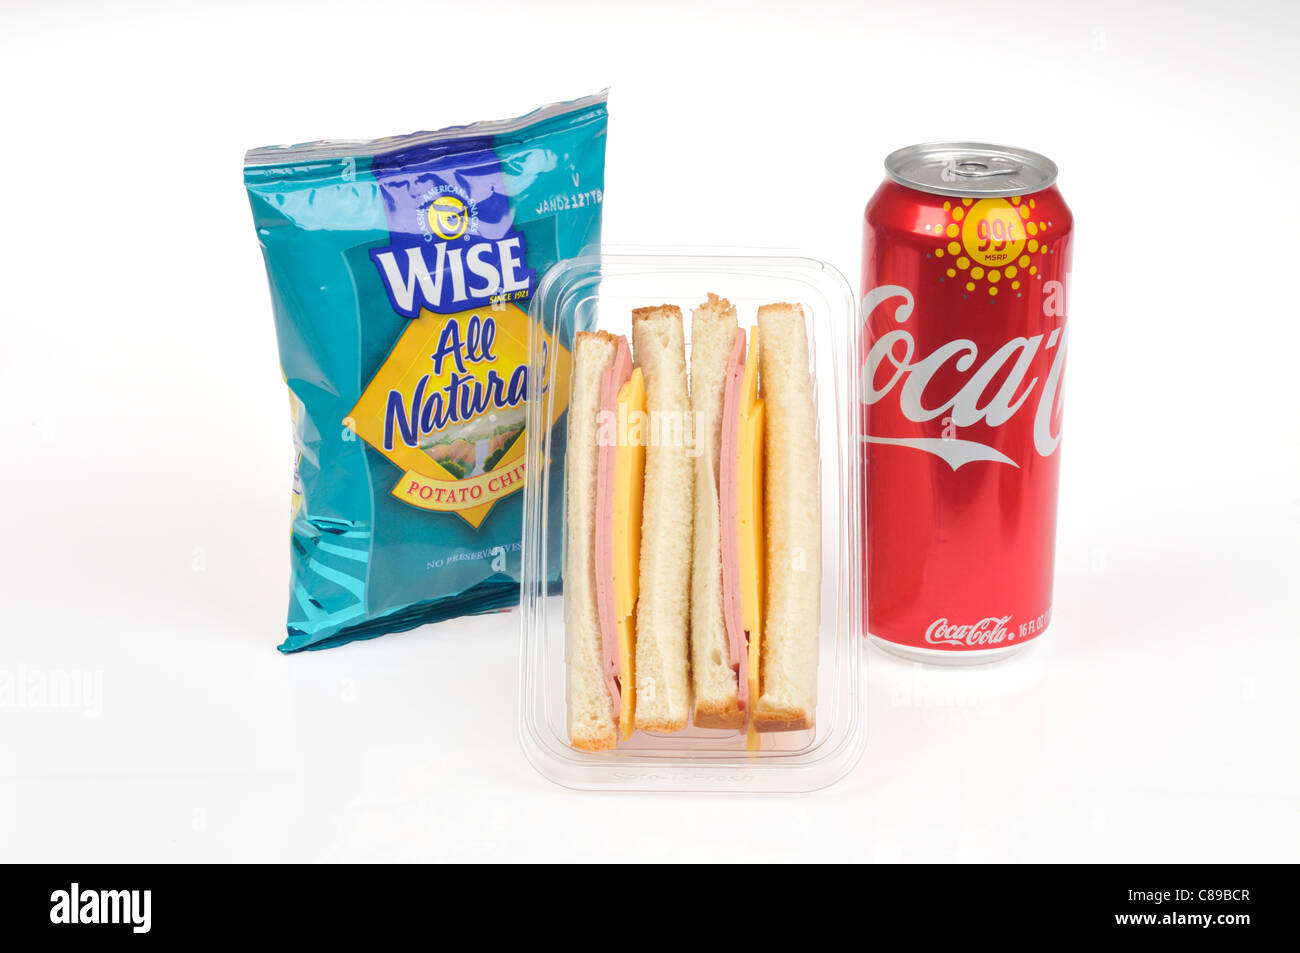 Bologna and cheese sandwich with bag of potato chips and can of coke on white background. Stock Photo